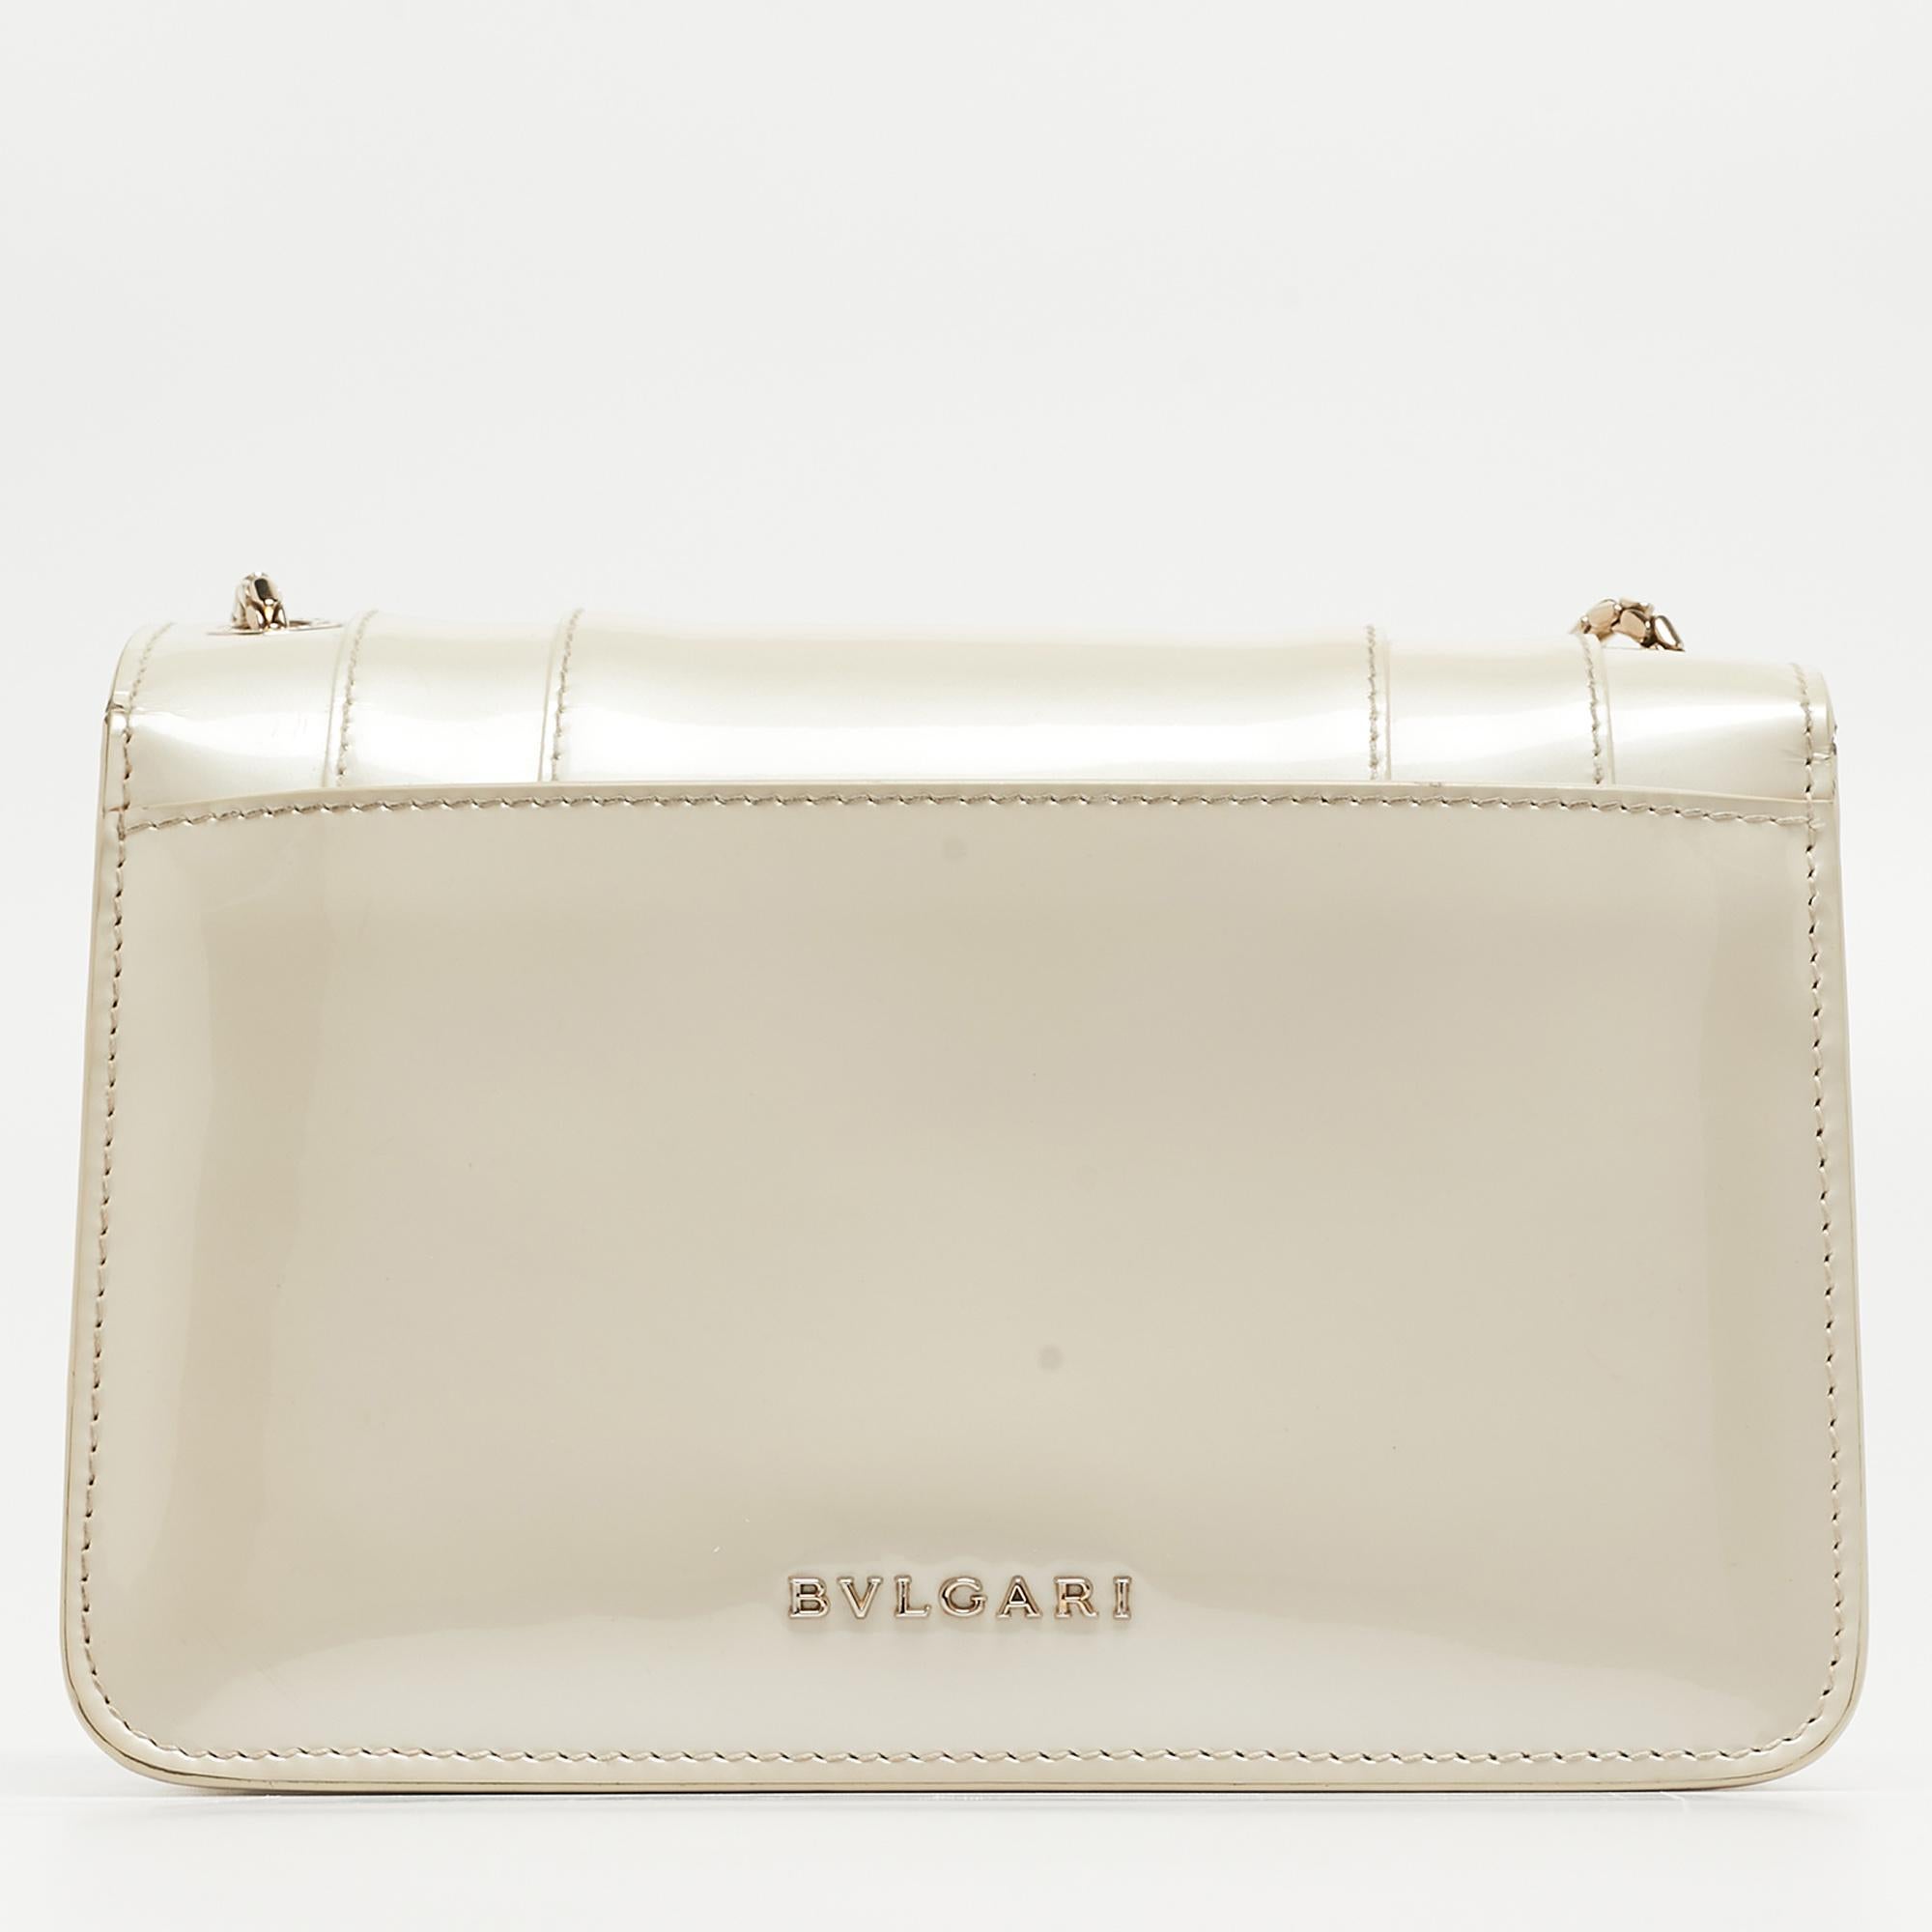 Dazzle the eyes that fall on you when you swing this stunning Bvlgari creation. Crafted from leather, the shoulder bag is styled with a flap that has the iconic Serpenti head closure. The bag has a spacious interior and a strap for an easy carrying